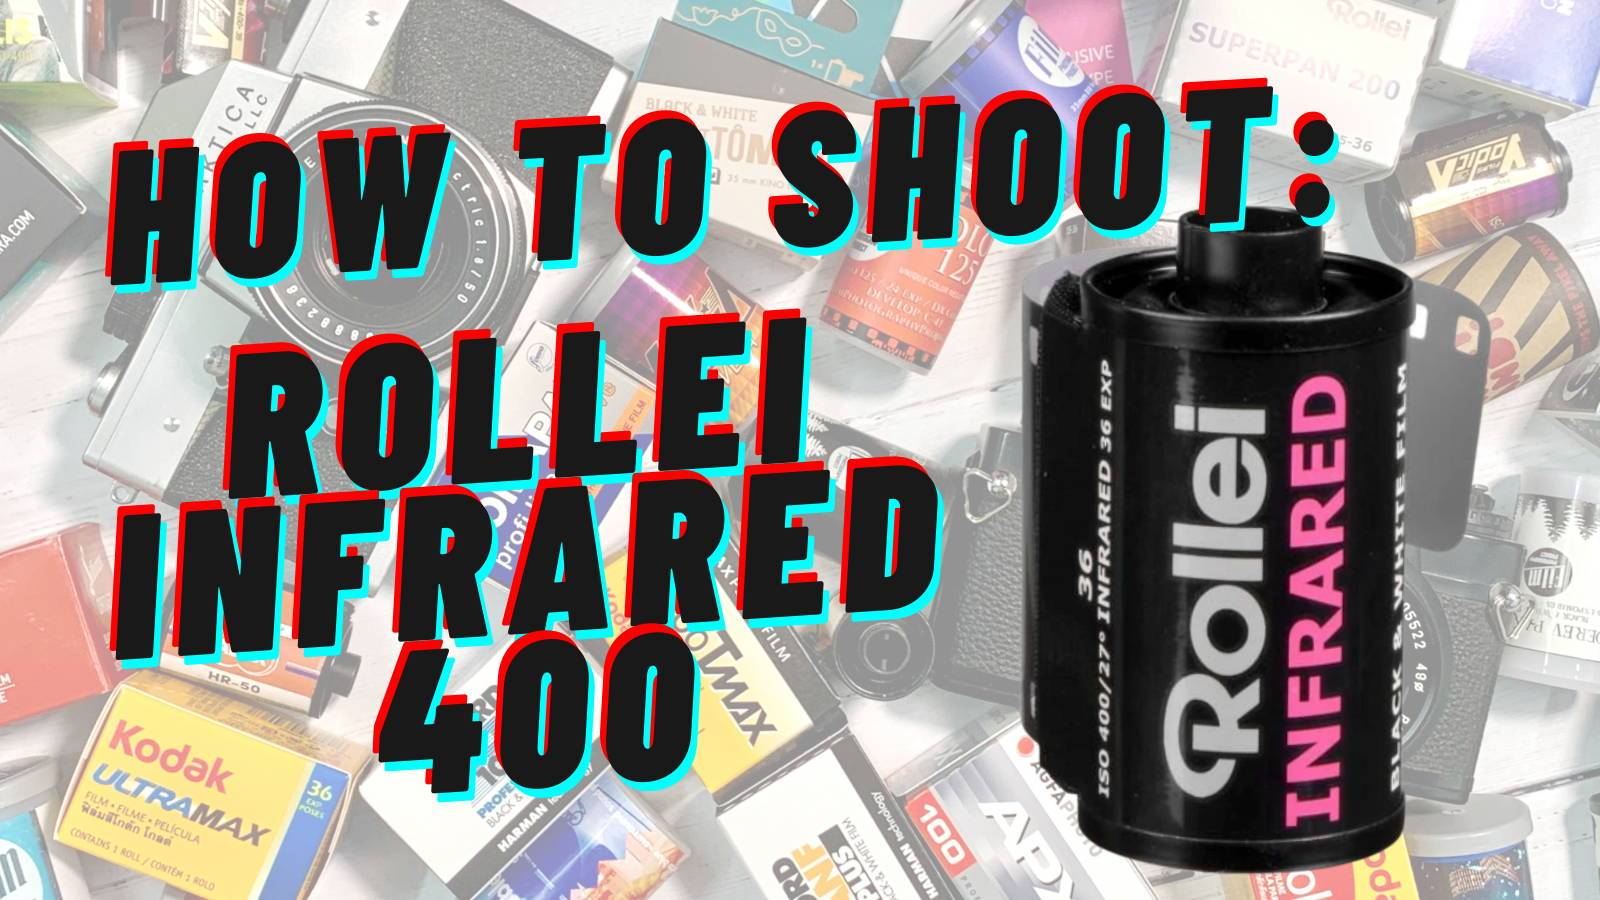 How to Shoot Rollei Infrared Film - Analogue Wonderland